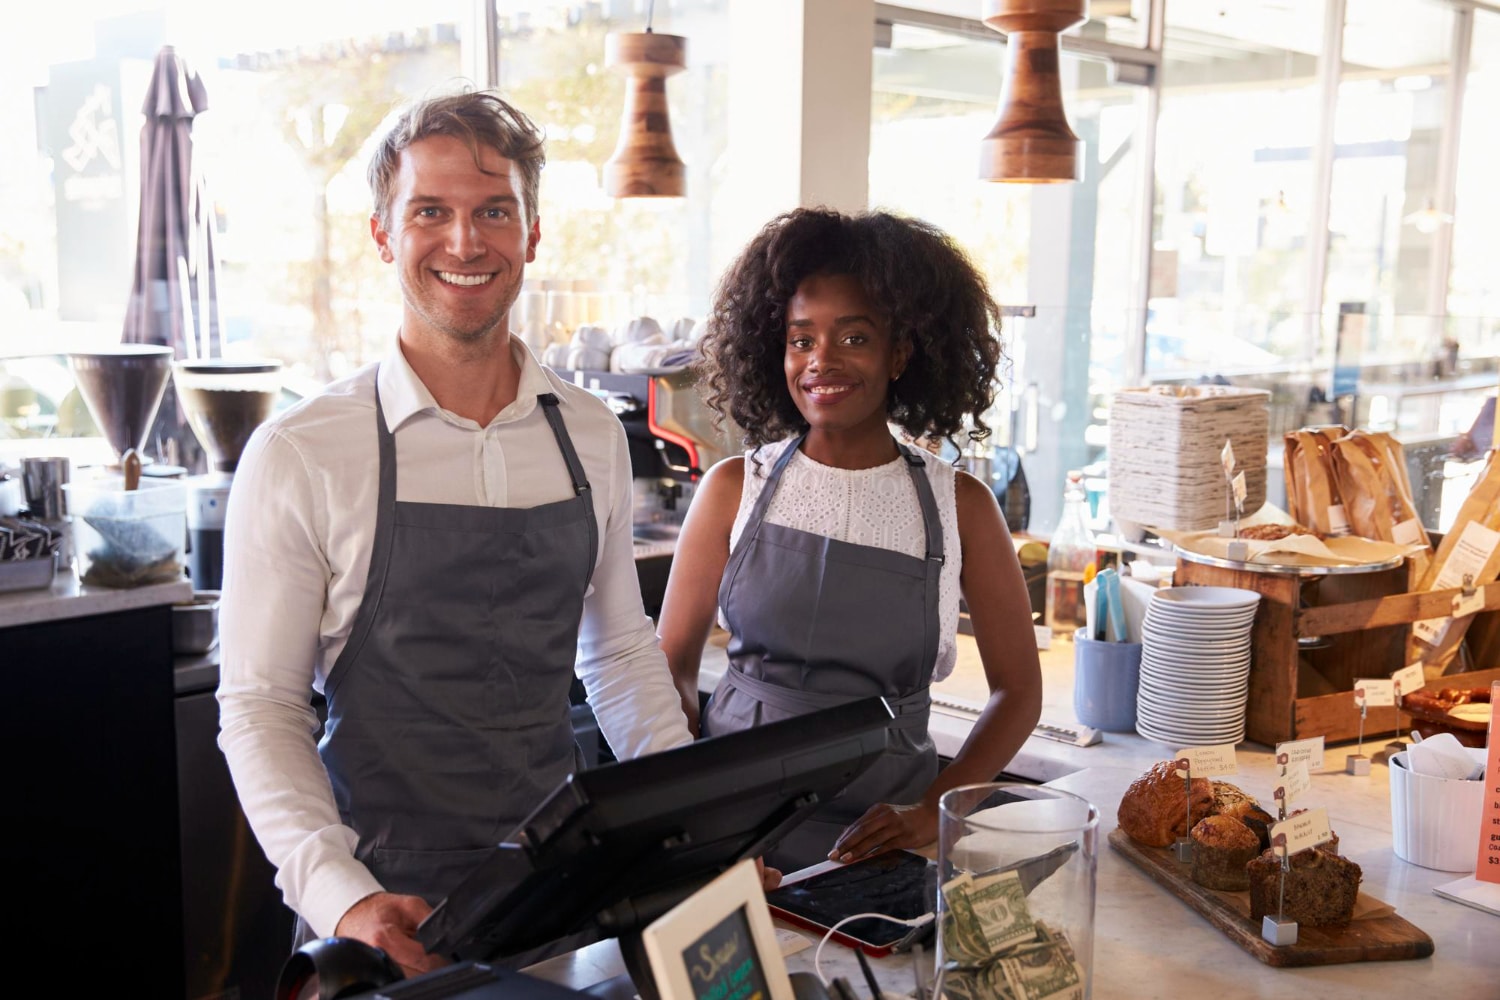 Pos System for Small Business